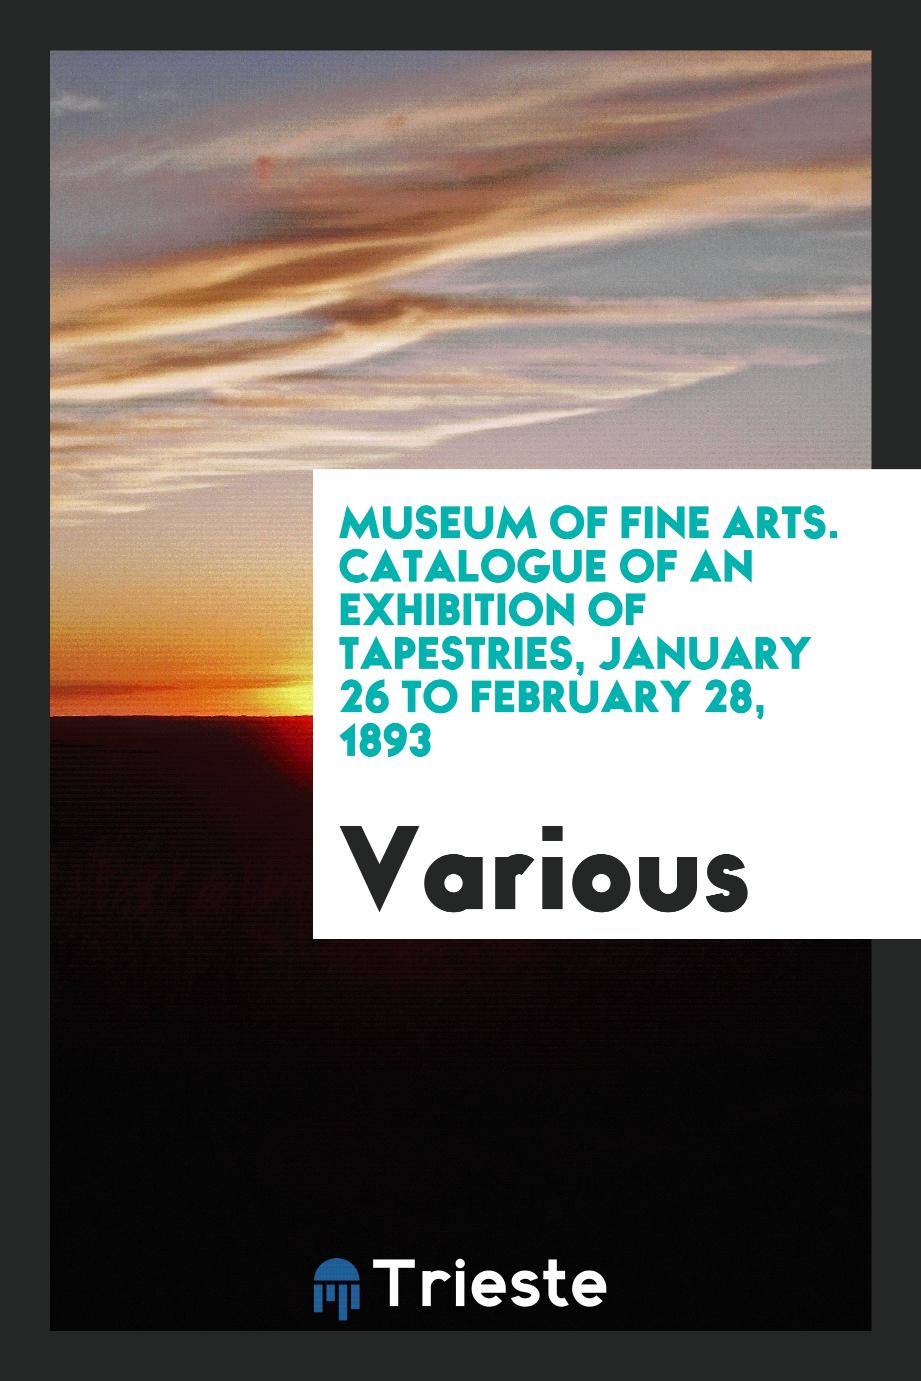 Museum of Fine arts. Catalogue of an exhibition of tapestries, January 26 to February 28, 1893